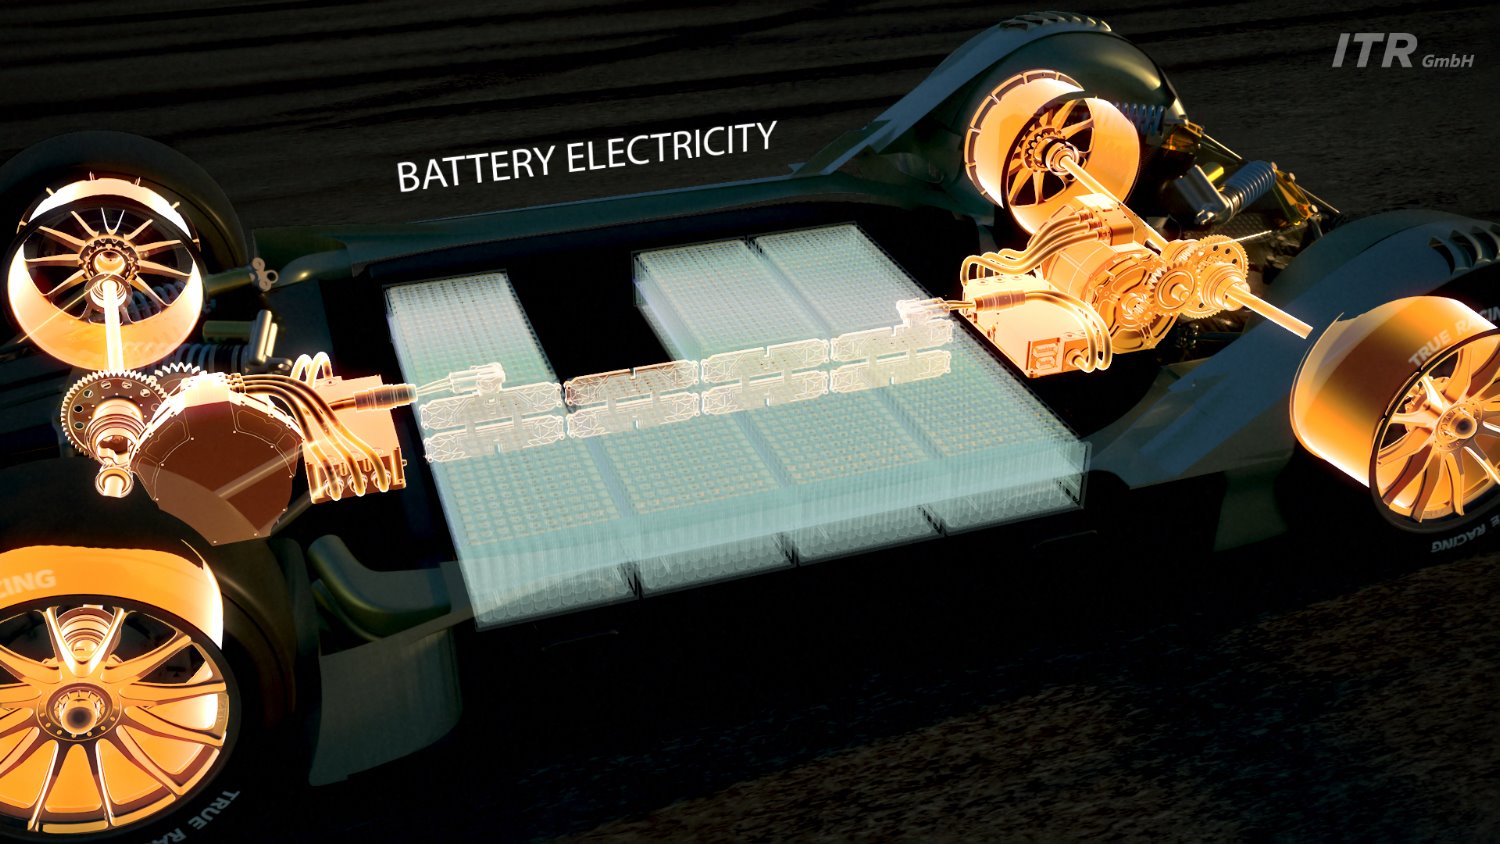 The car’s battery pack would be situated safely within the car’s carbon monocoque